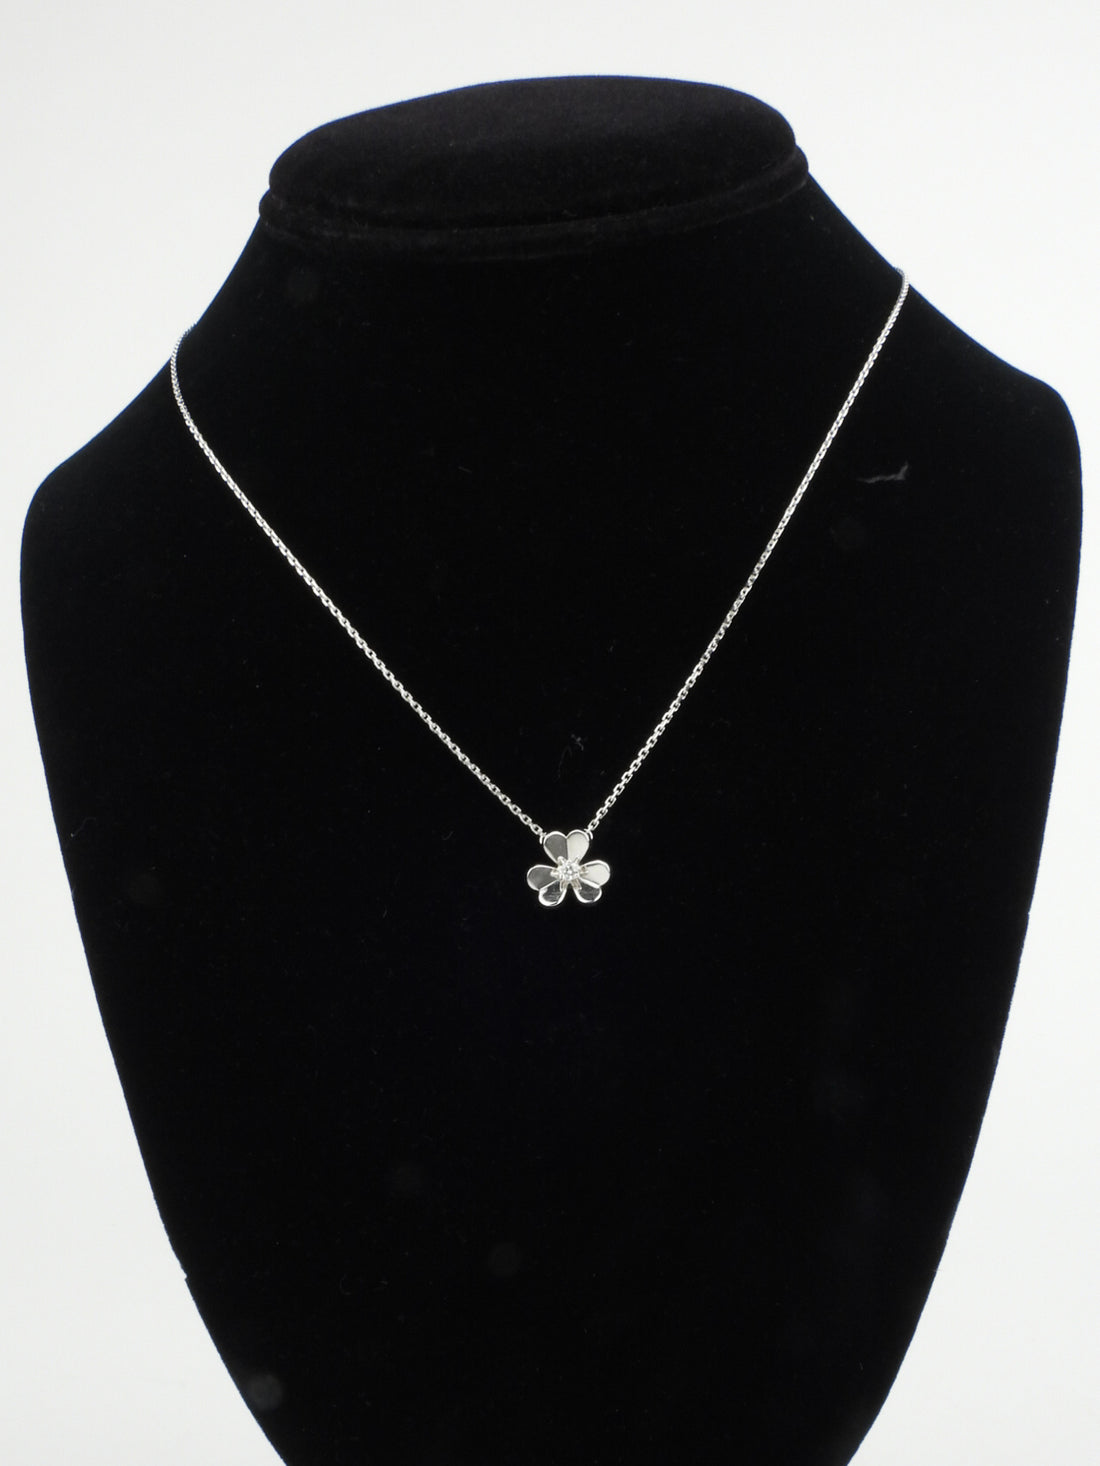 Van Cleef and Arpels 18K White Gold and Diamond Mini Frivole Pendant Necklace